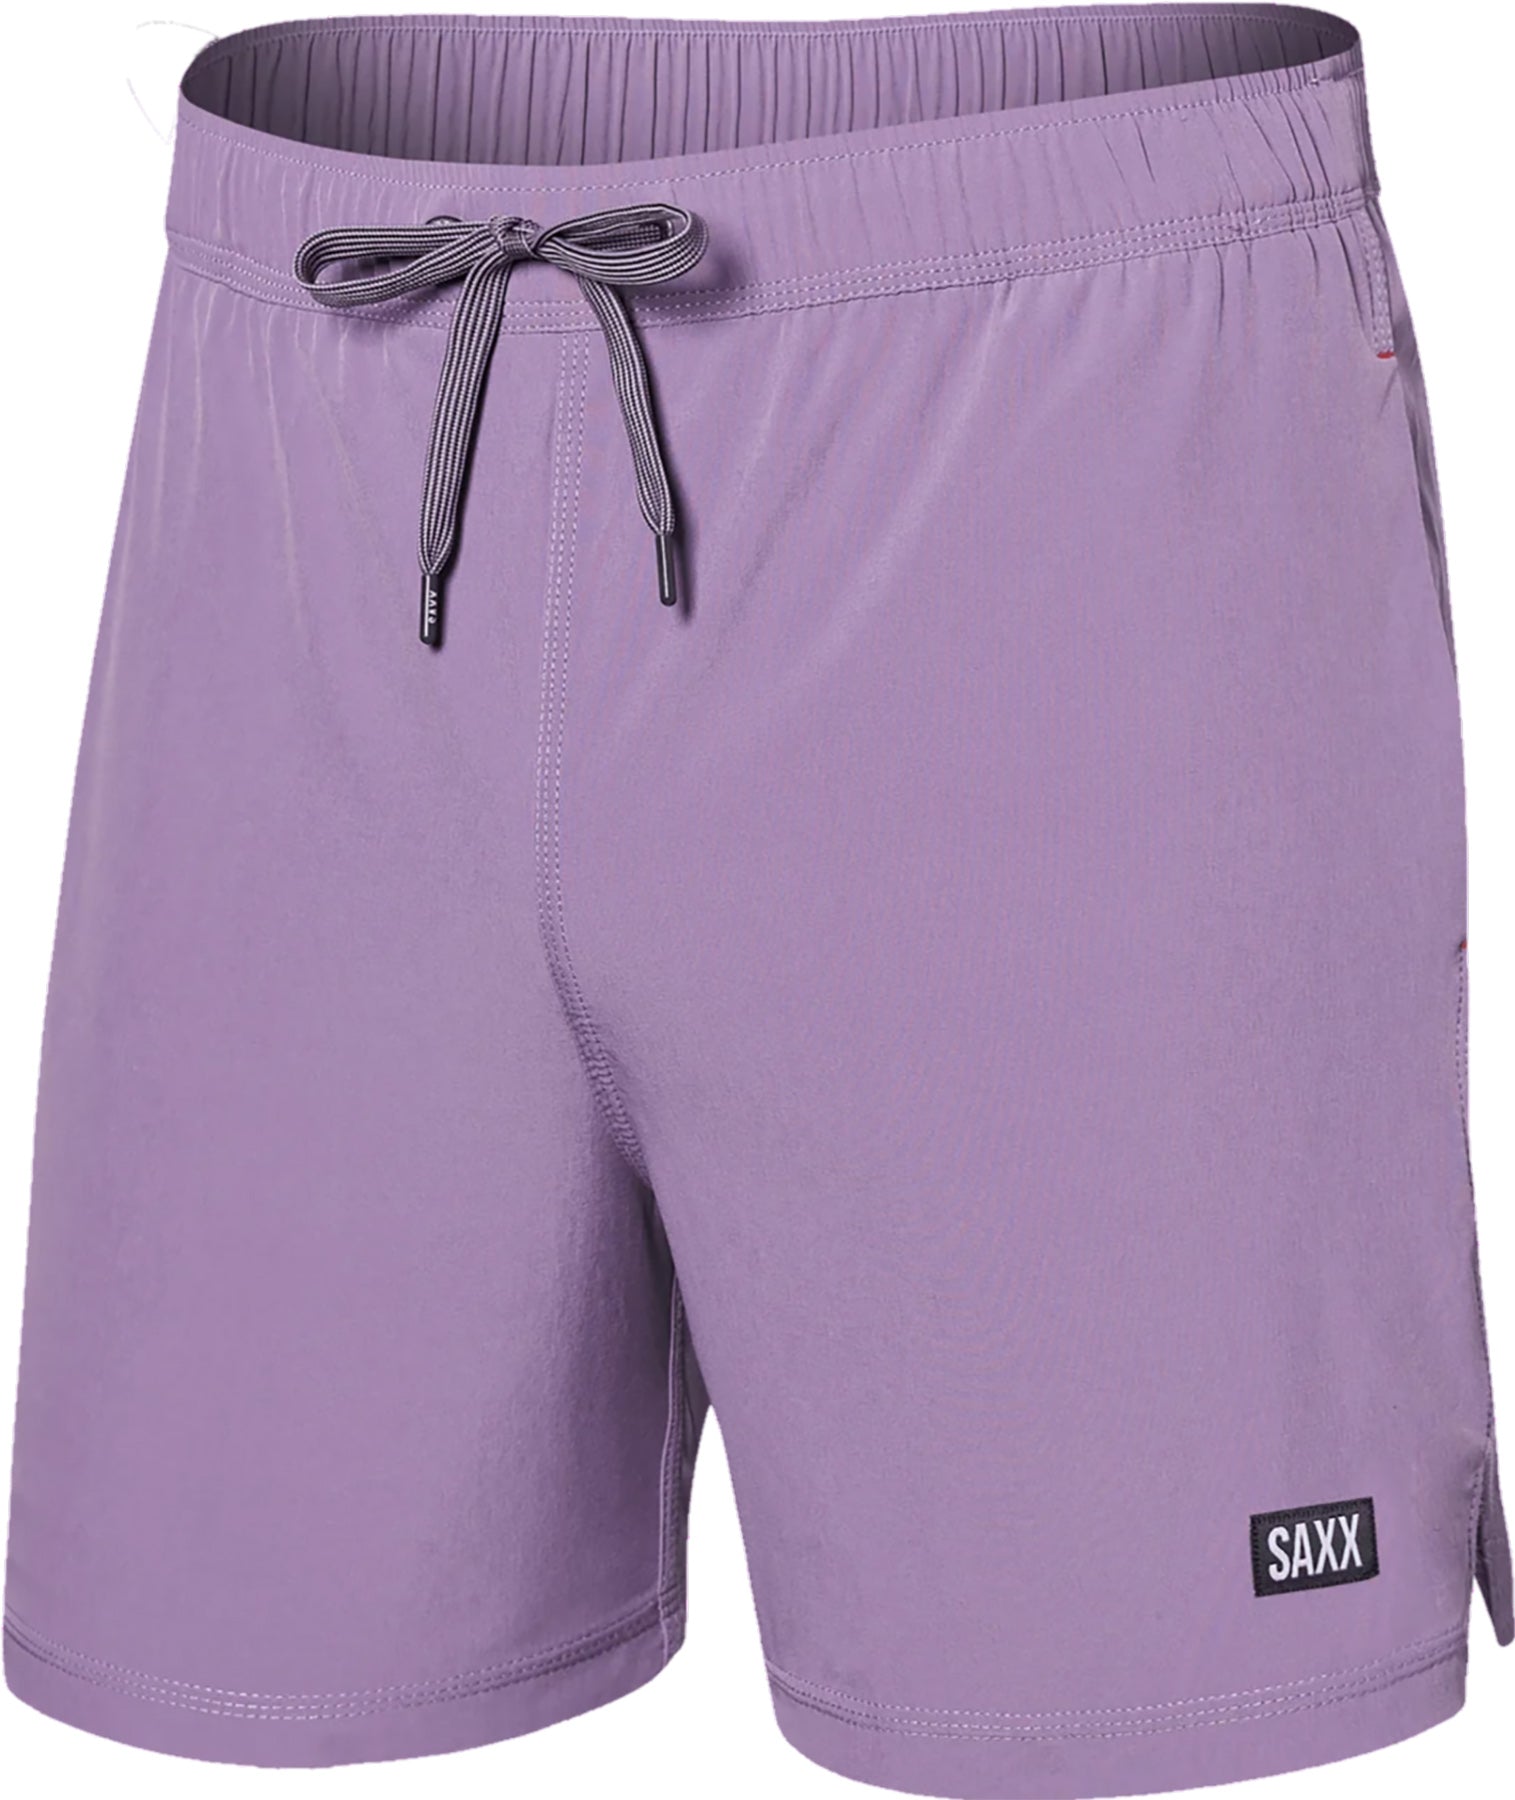 SAXX Oh Buoy 2N1 Volley 5 Inches Swim Shorts - Men's